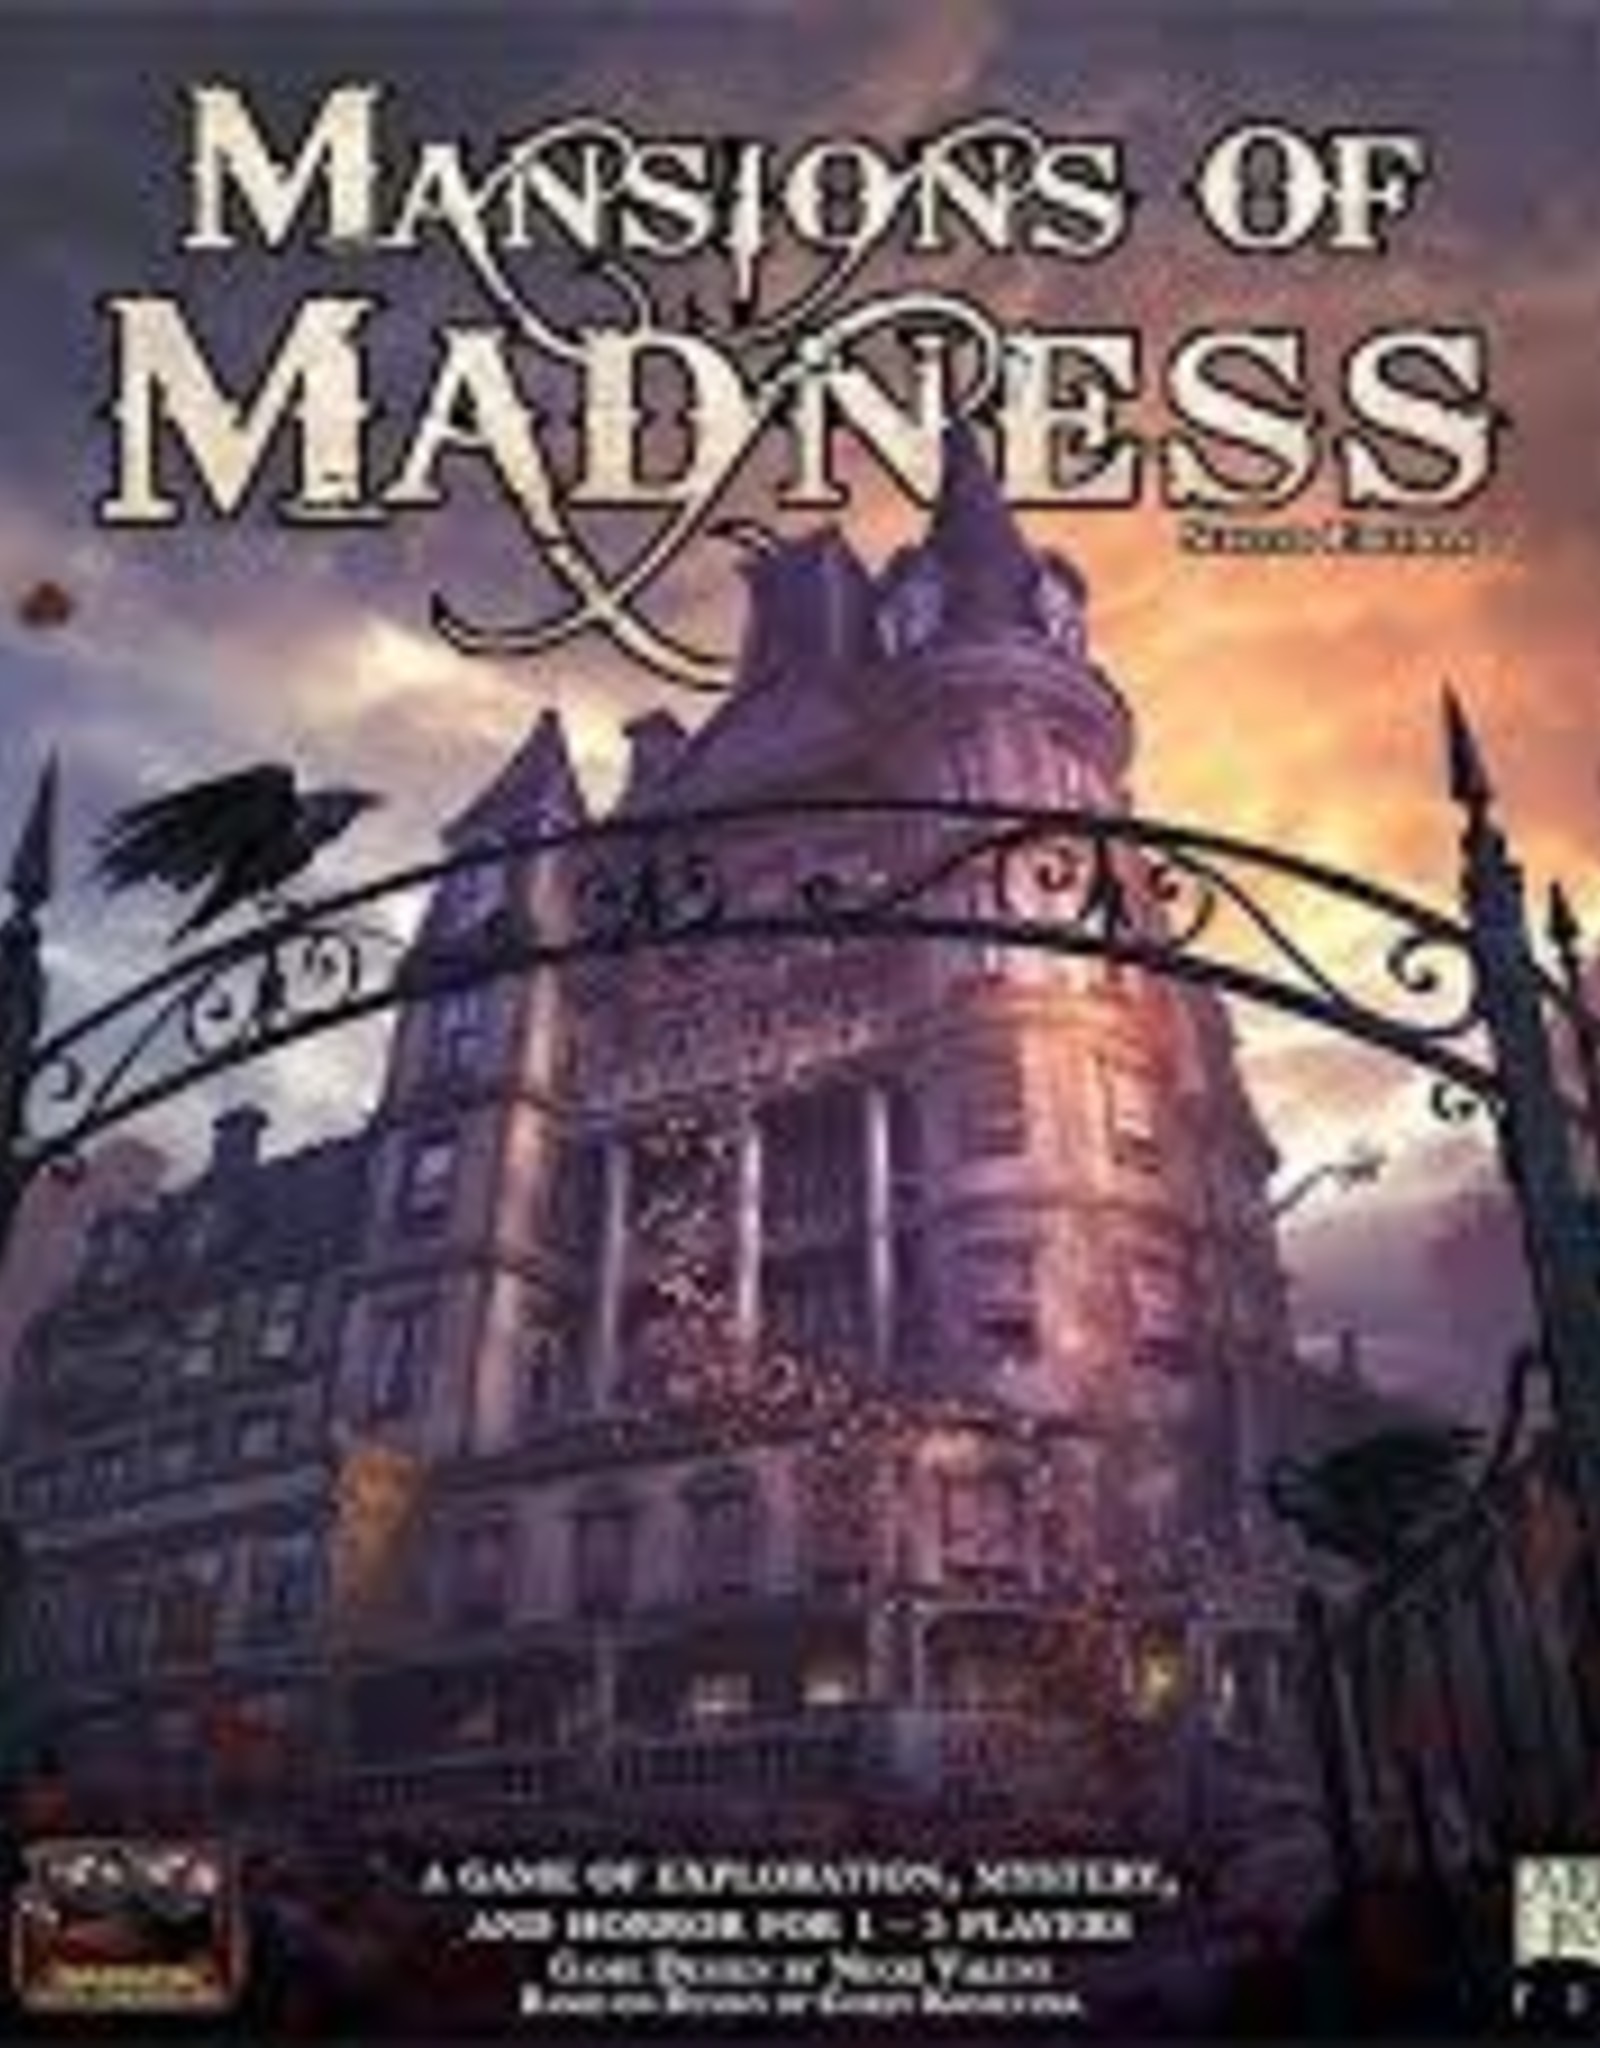 Steam mansions of madness фото 86